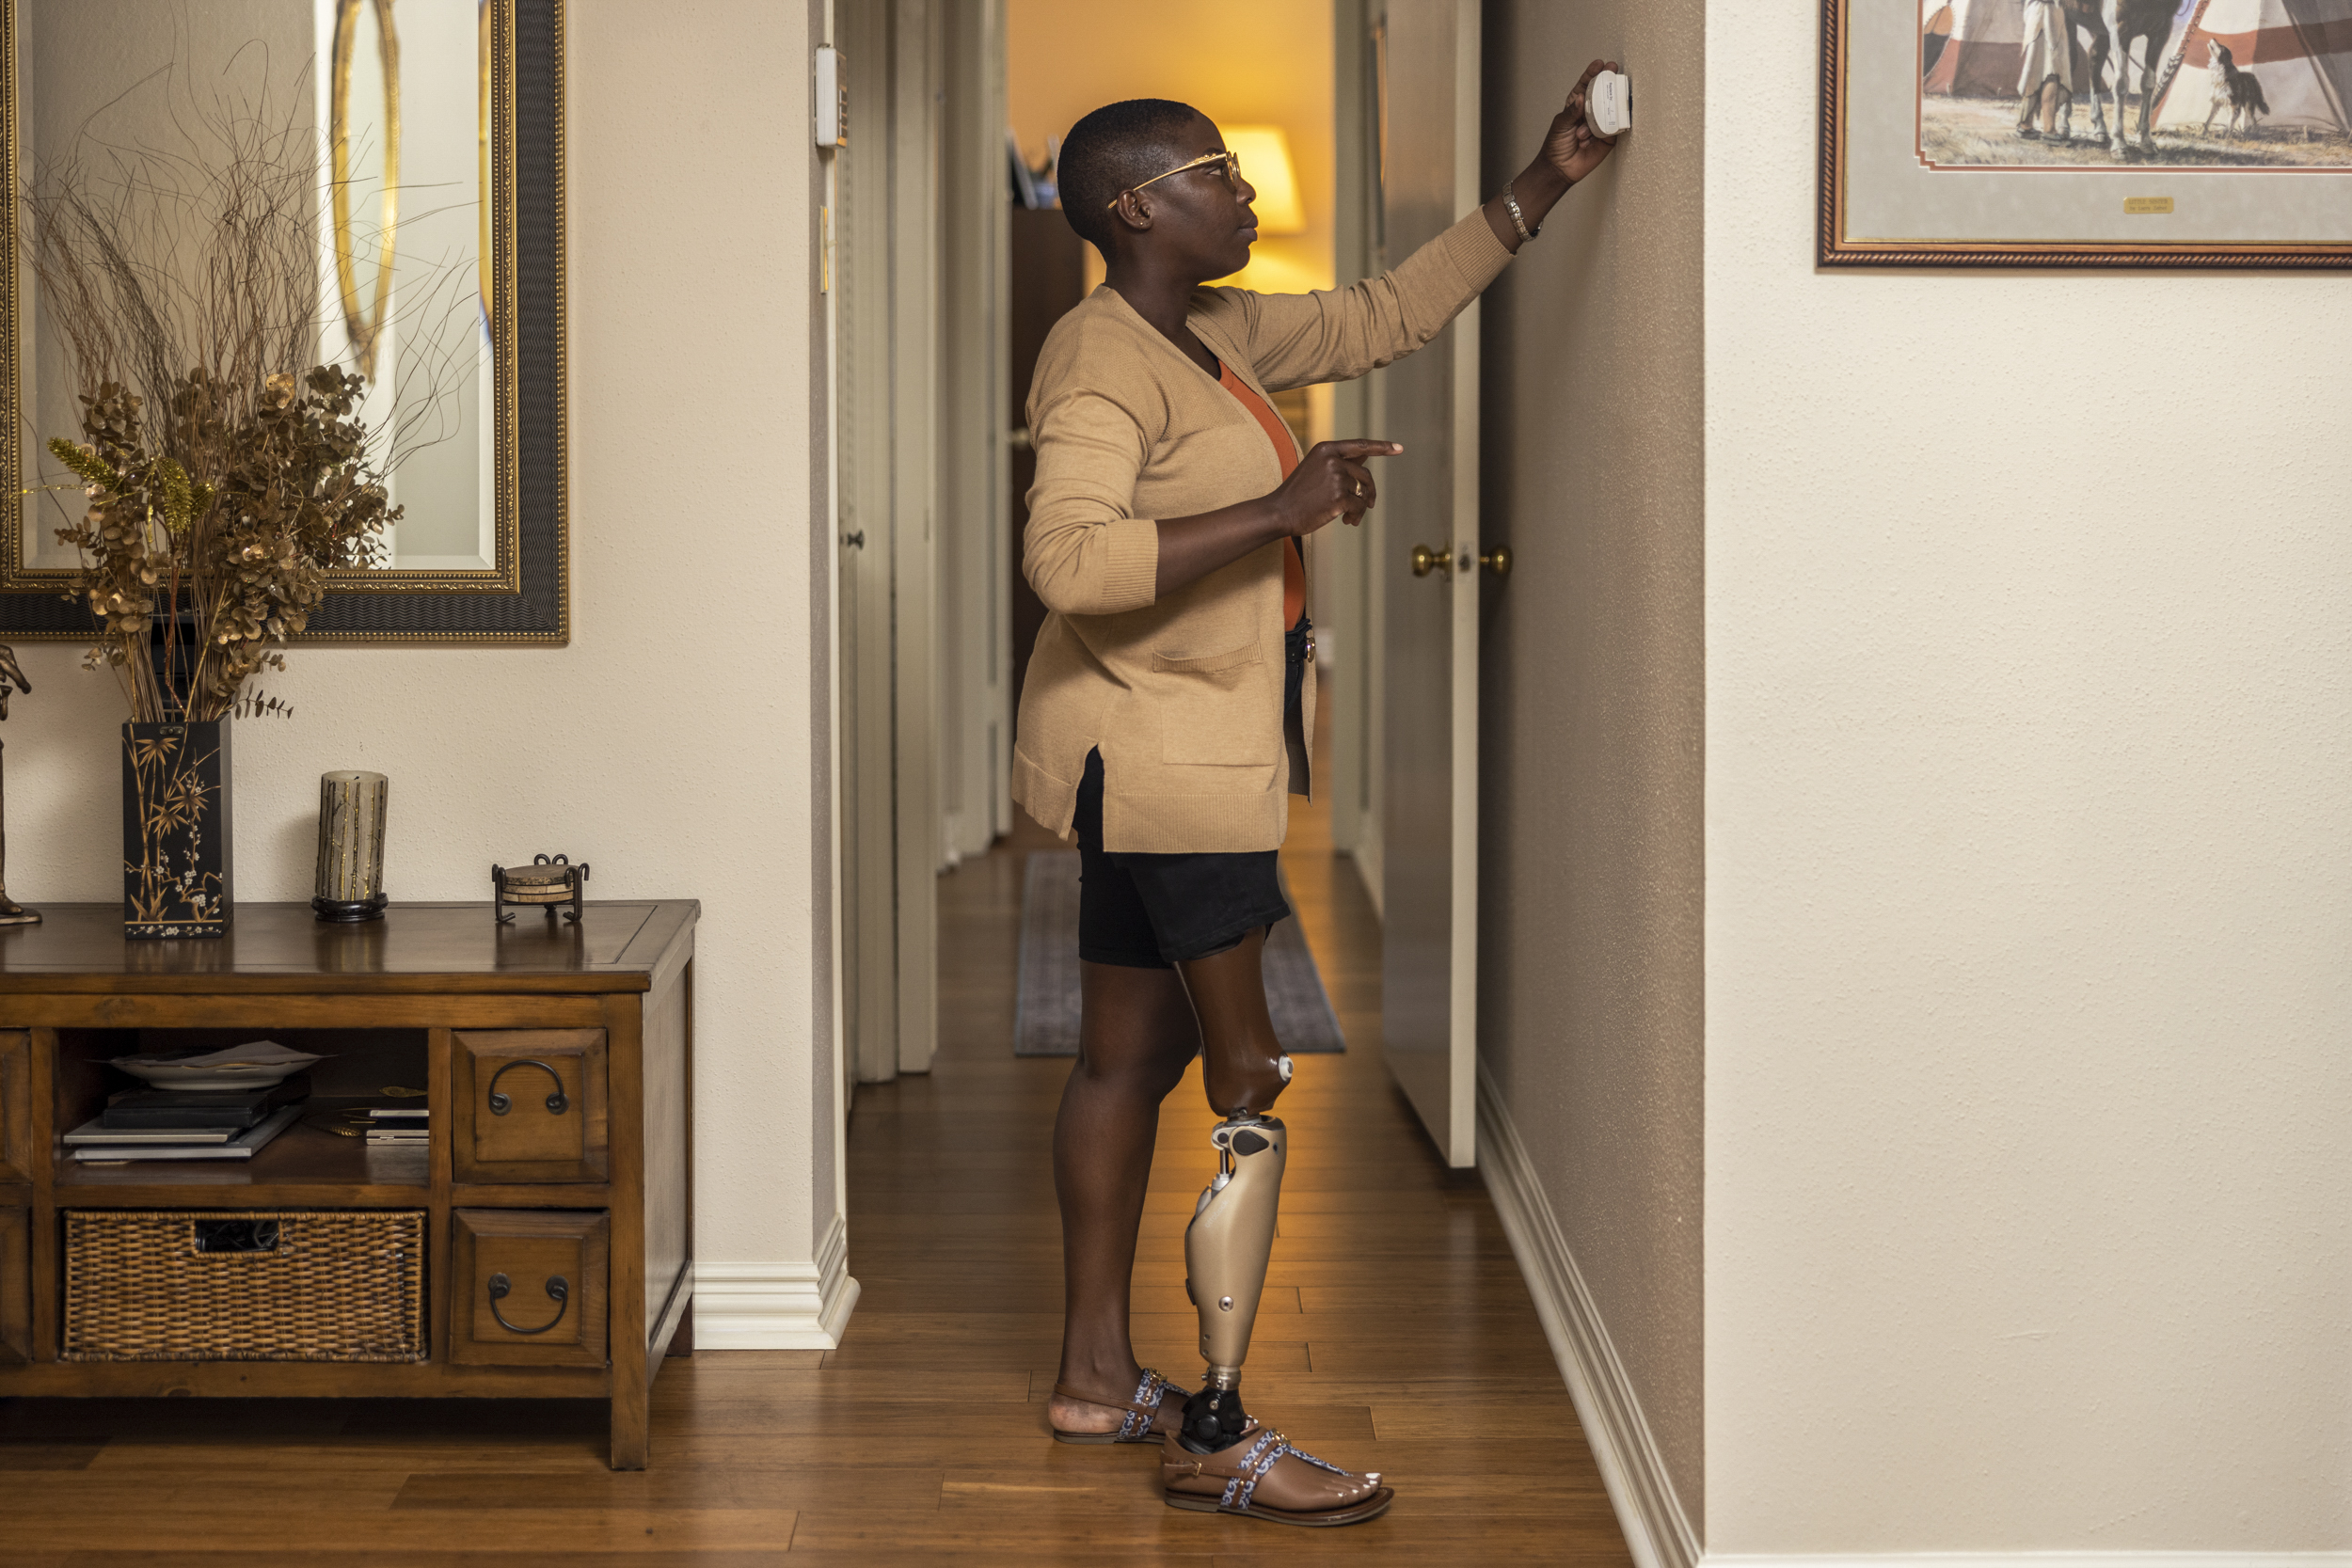 A black woman with a prosthetic leg adjusting her thermometer